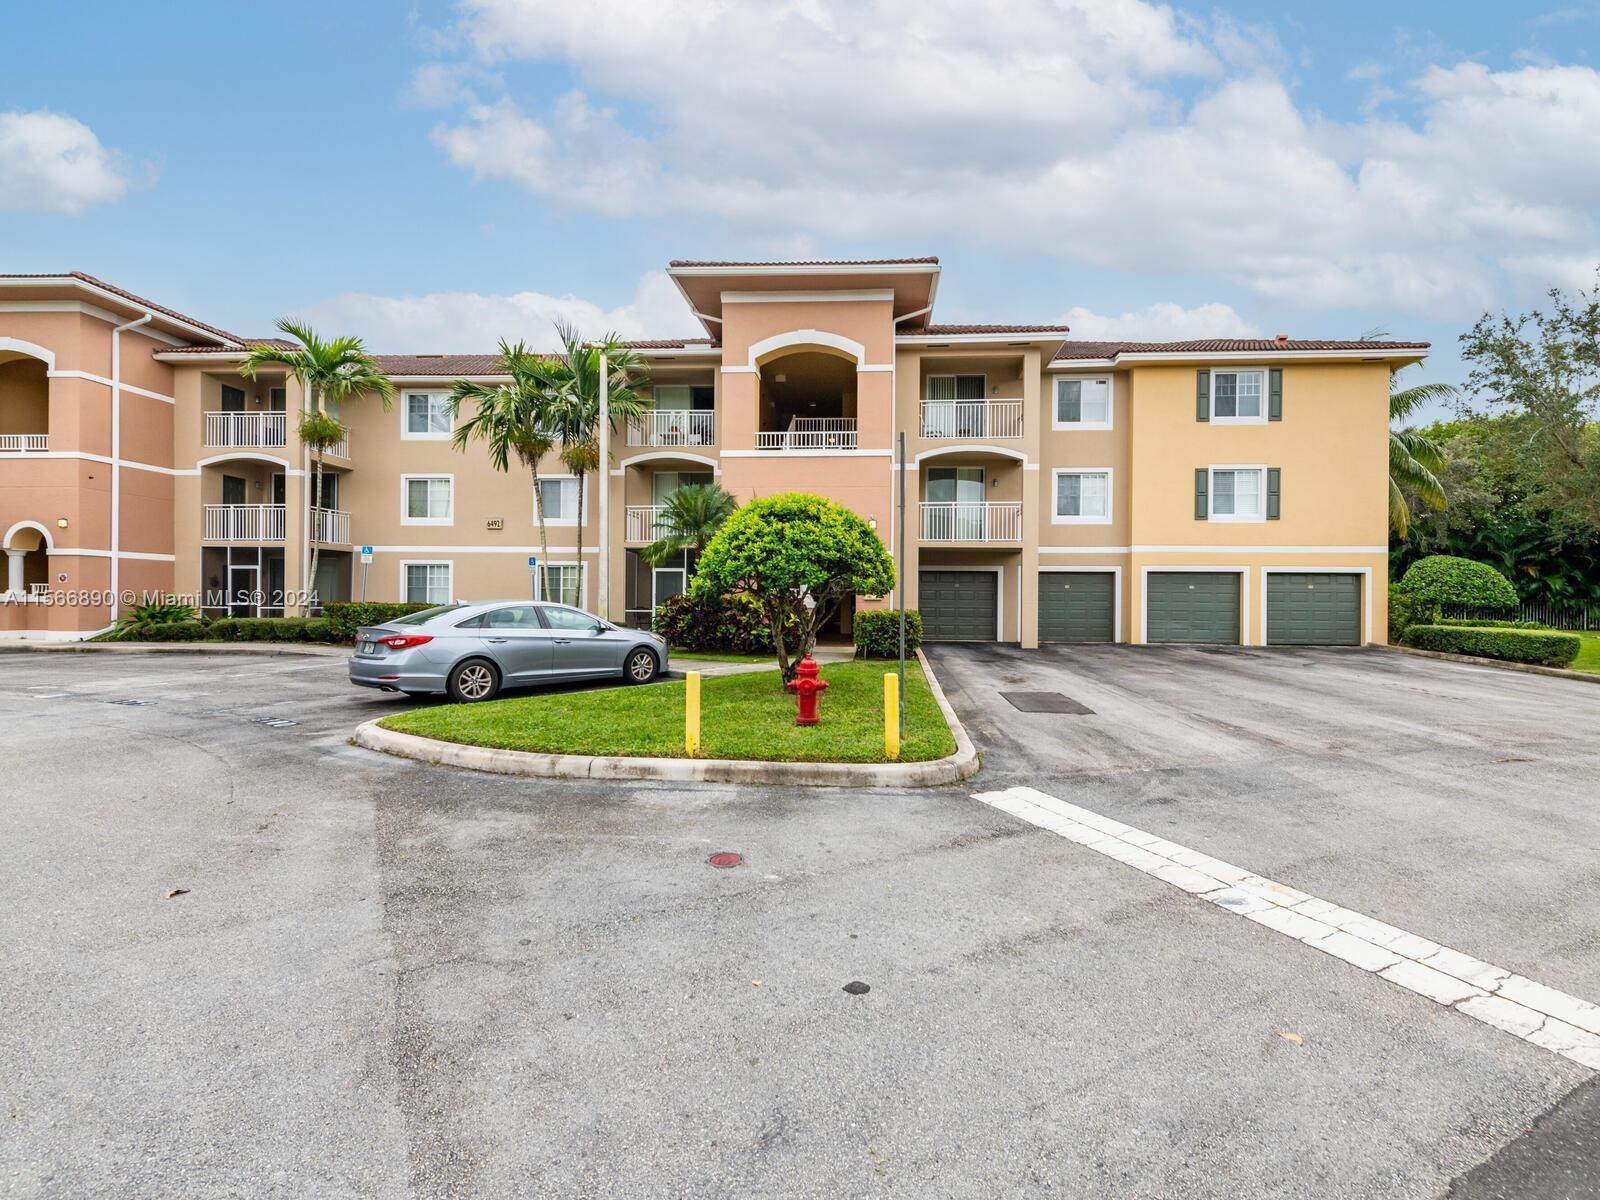 Photo of 6492 Emerald Dunes Dr #206 in West Palm Beach, FL